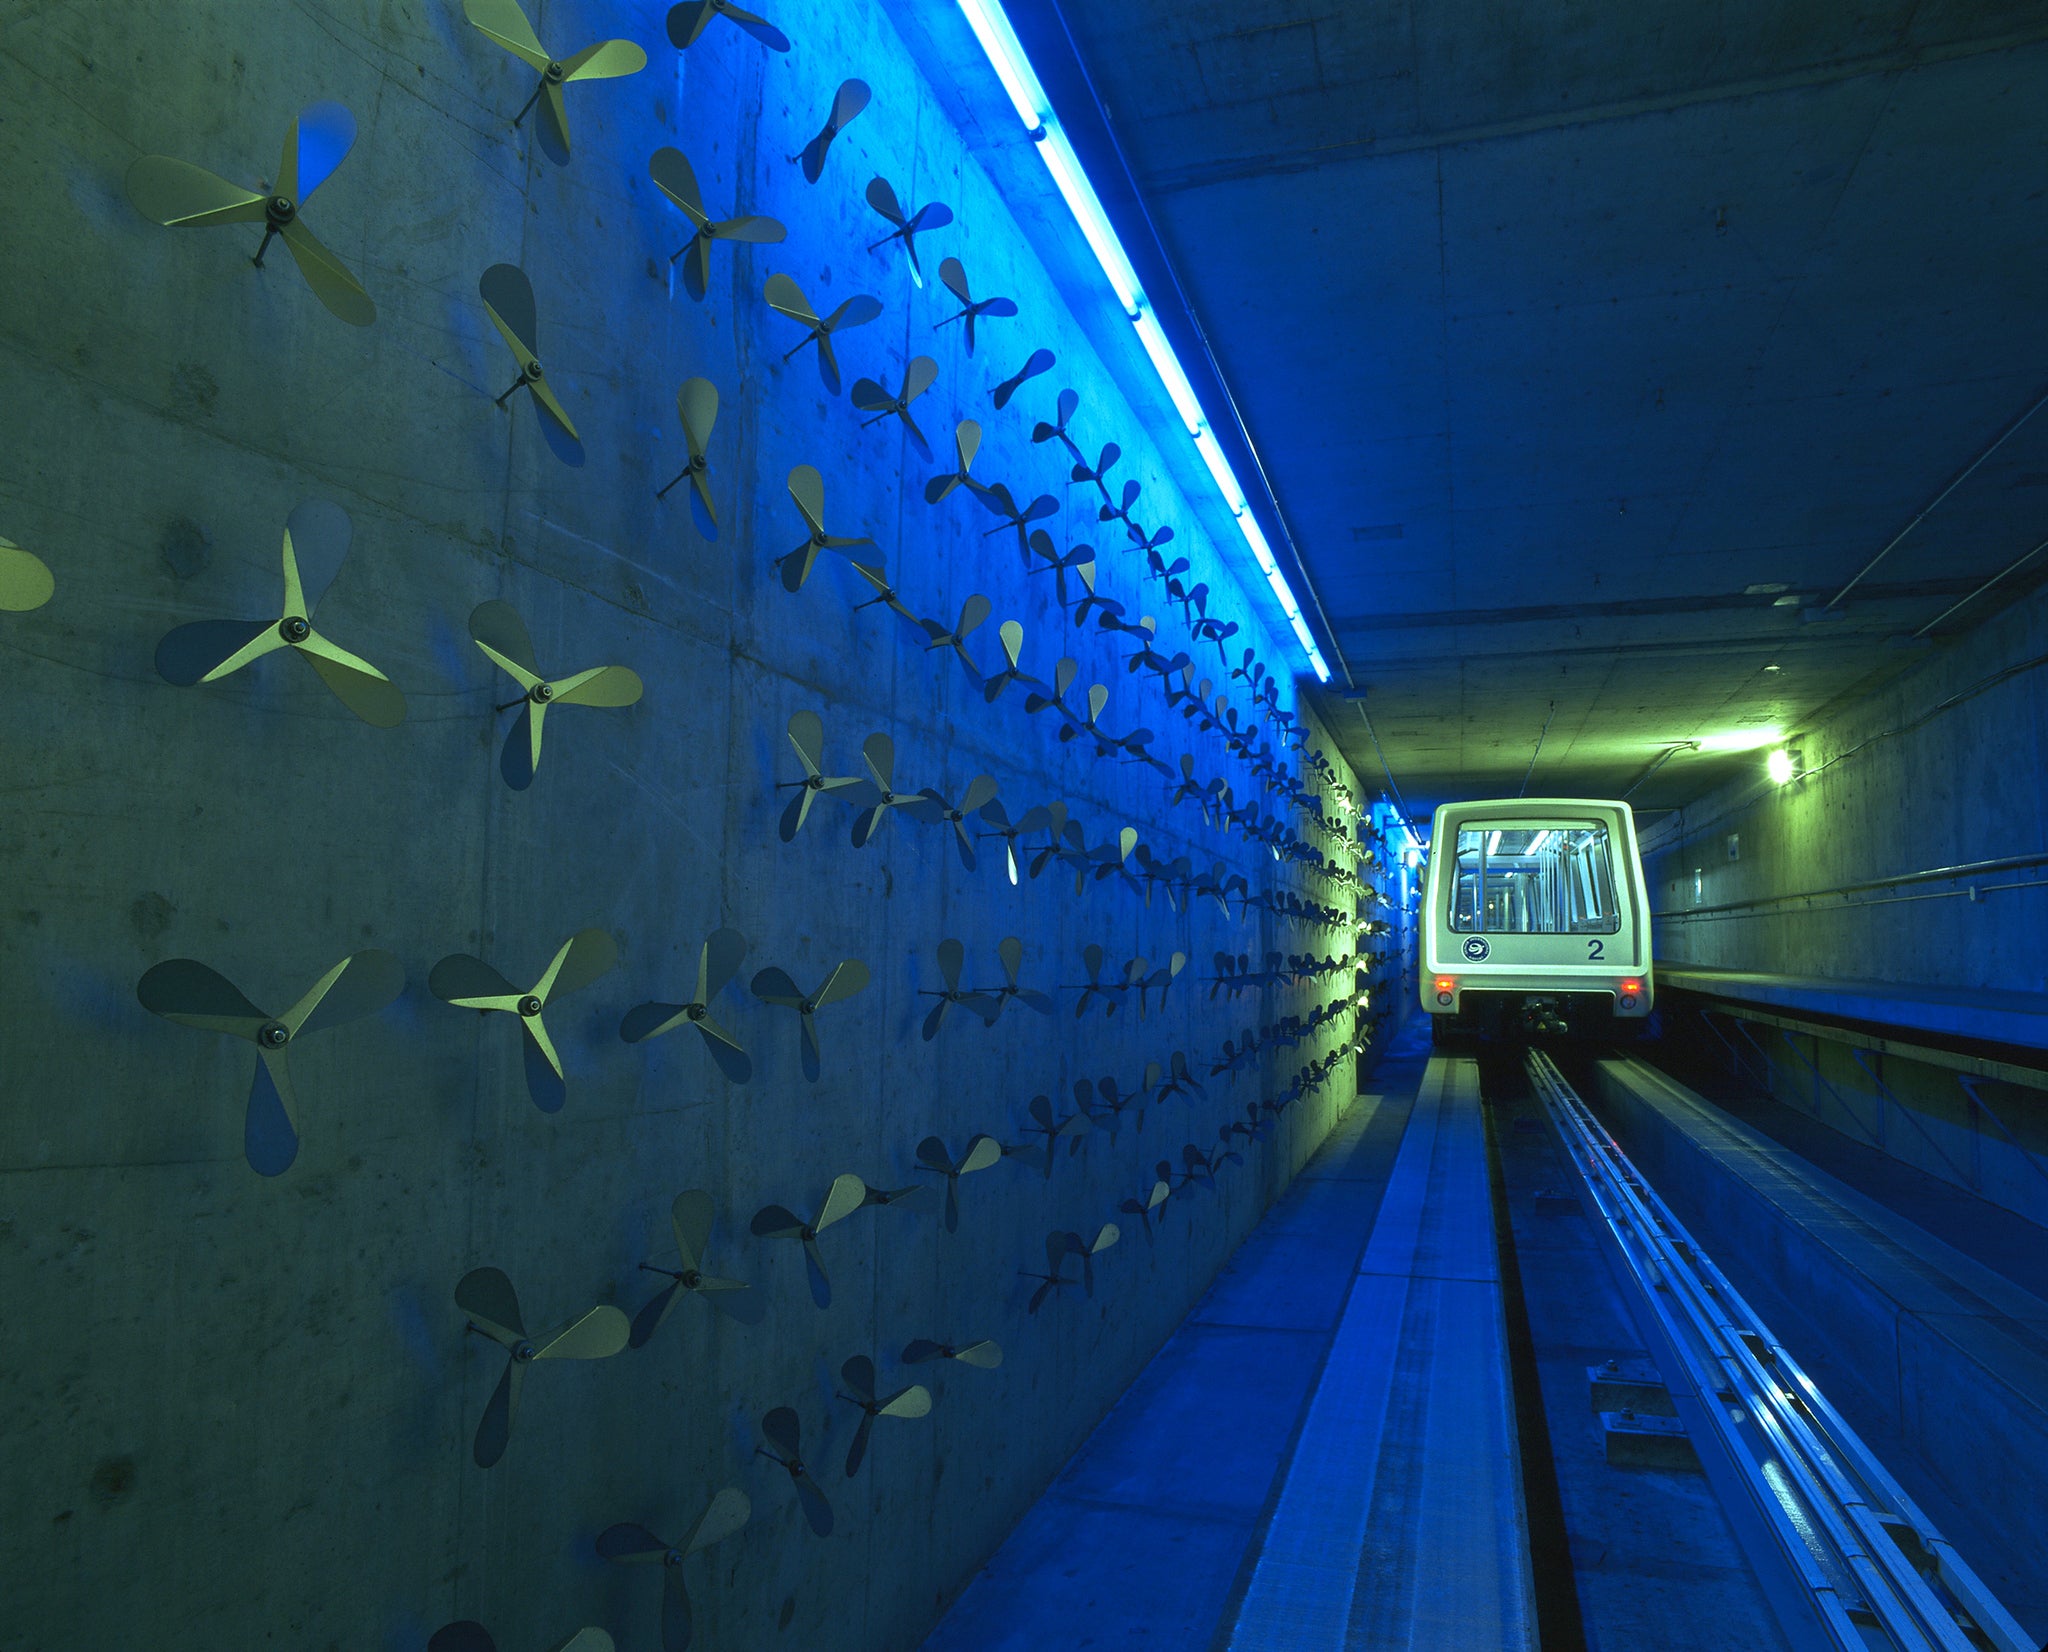 The tunnels also feature trams, which may or may not shuttle lizard people to their bunkers. (Image: Denver International Airport)